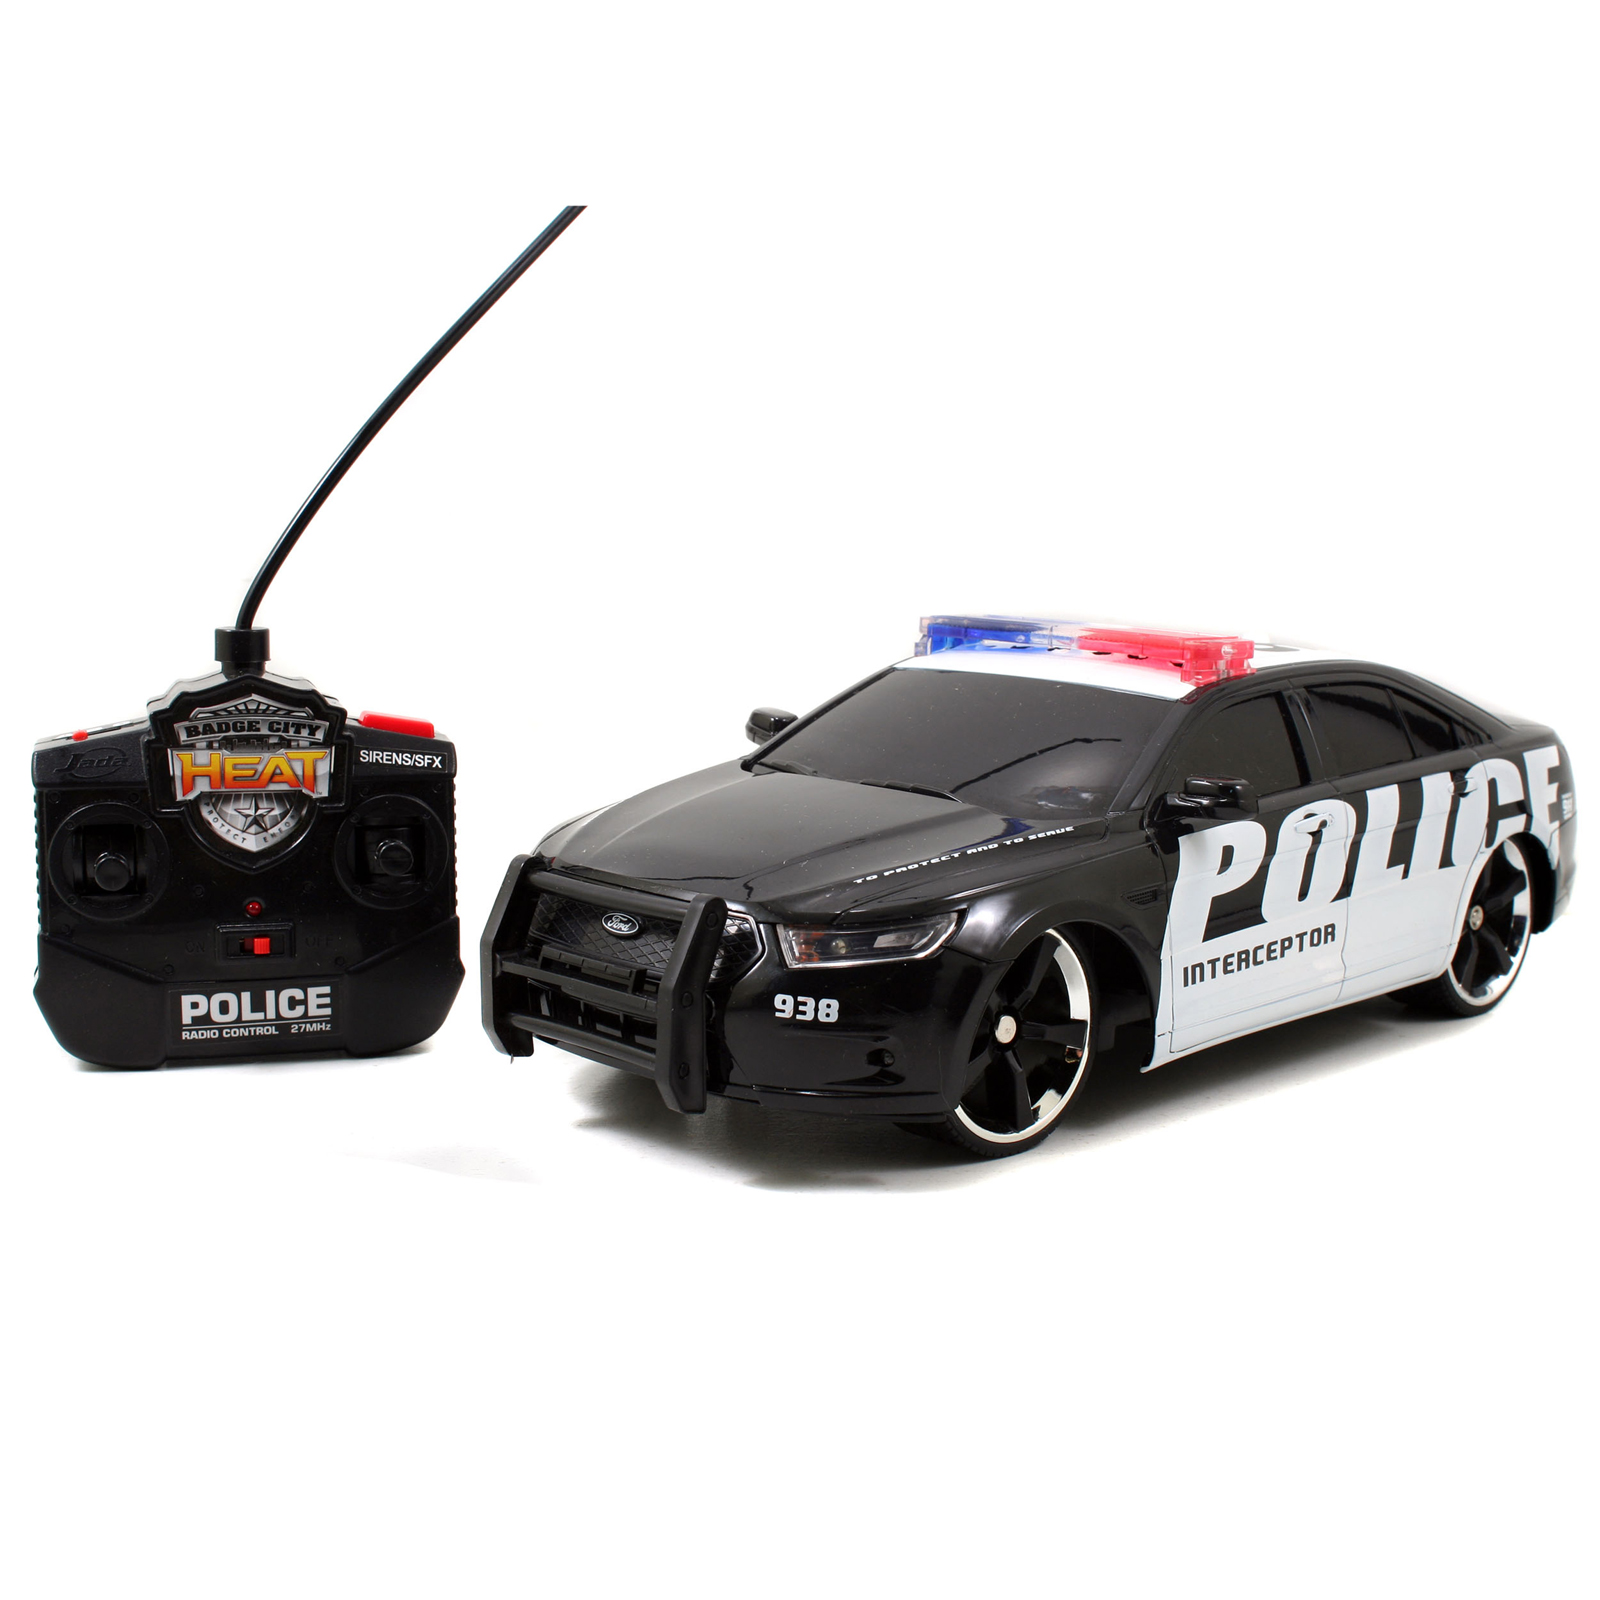 Heat 1:16 2013 Ford Interceptor Remote Control Car with Lights and Sounds